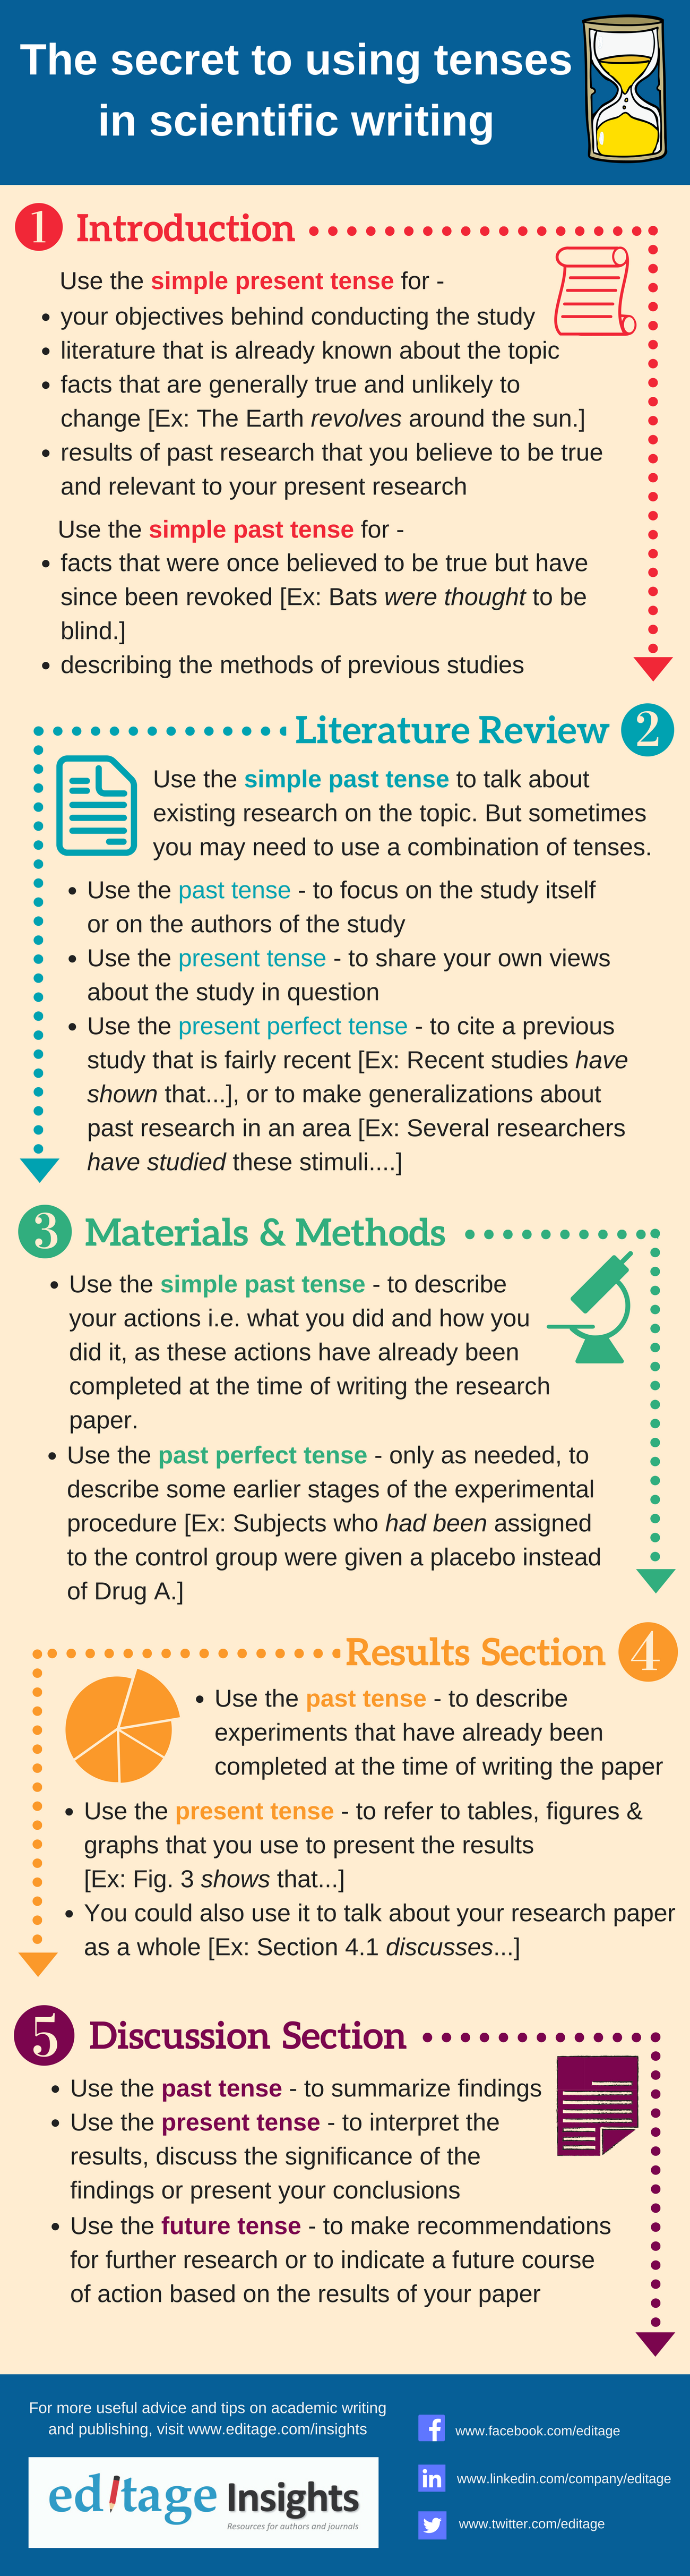 How to use correct tenses while writing a research paper